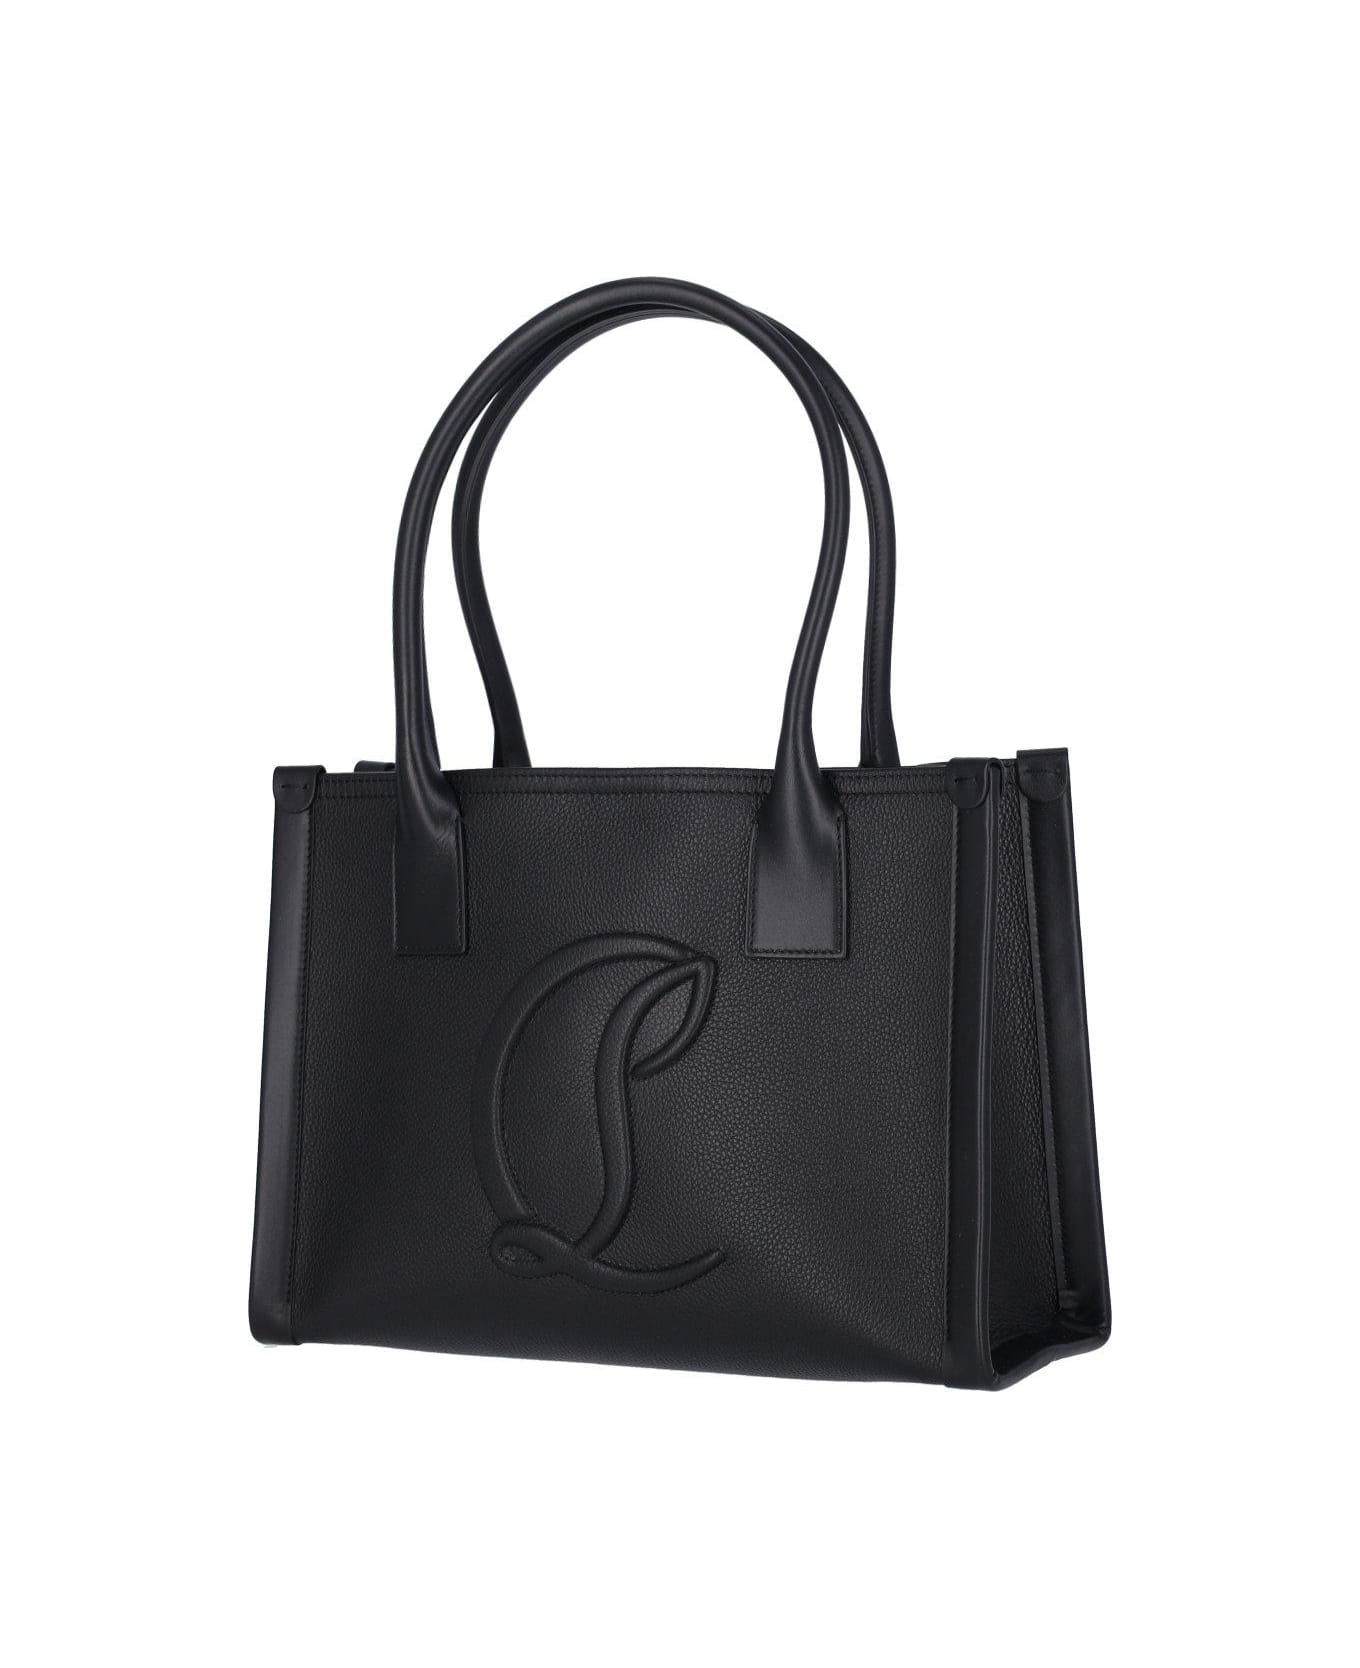 Christian Louboutin By My Side Small Tote Bag - Black/black/black